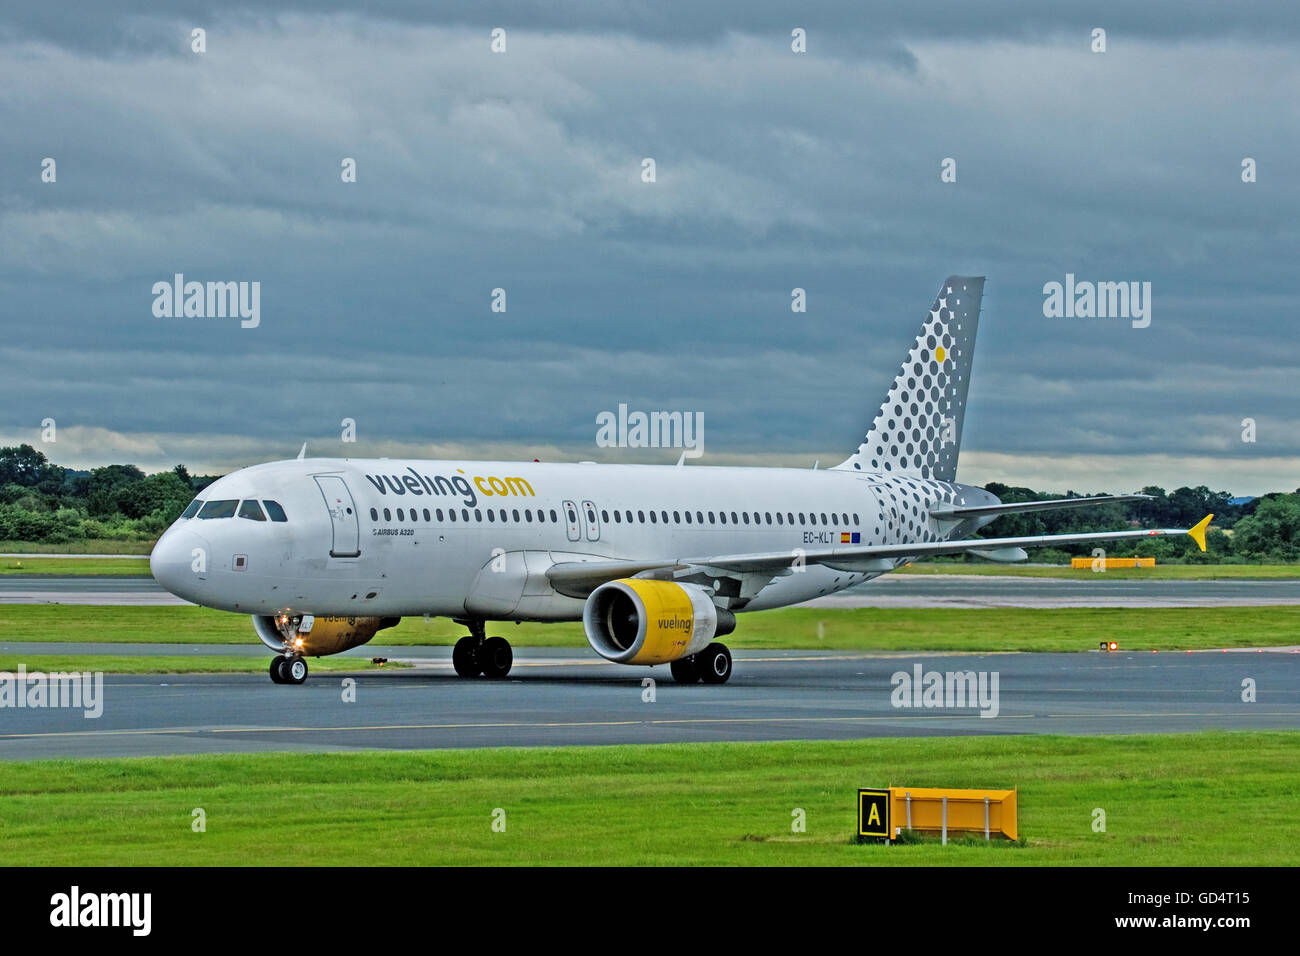 Vueling Airlines bringing a little colour to a grey day at Manchester Airport Stock Photo